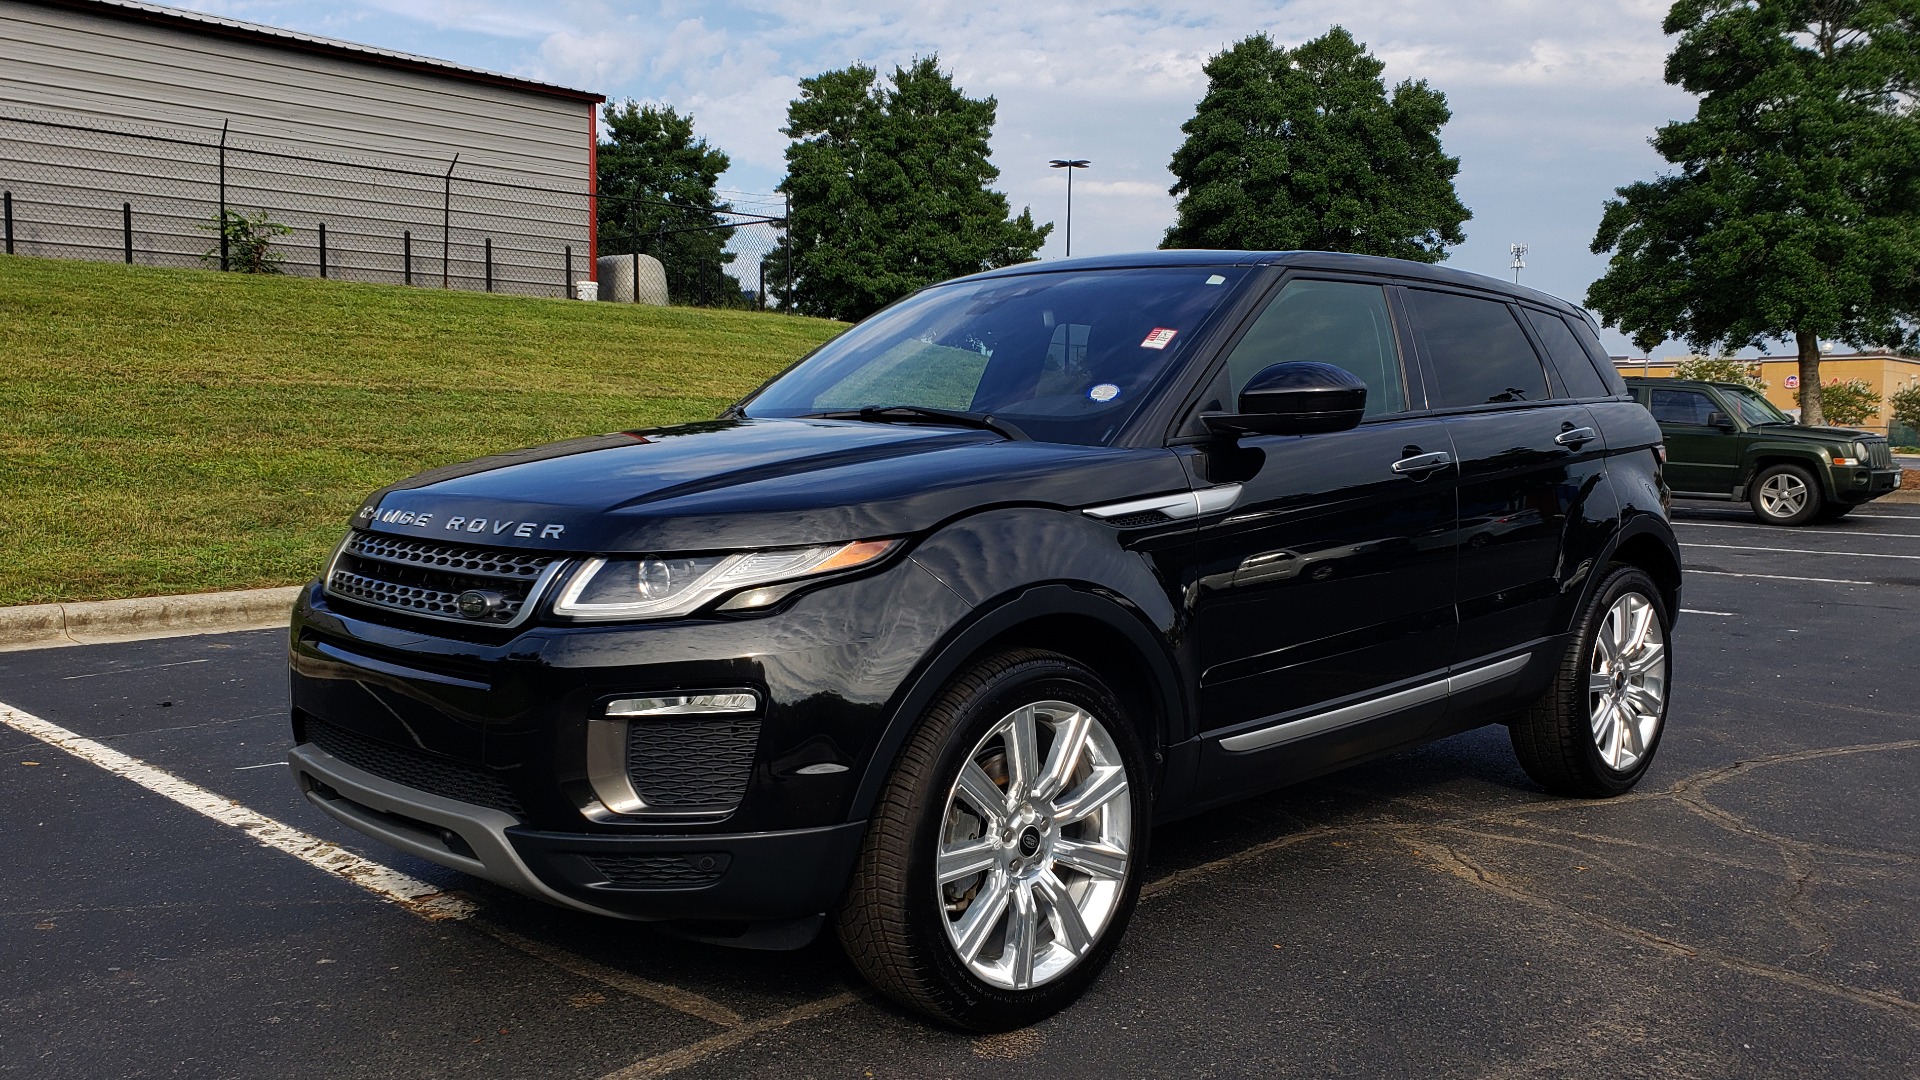 Used 2016 Land Rover RANGE ROVER EVOQUE HSE / AWD / NAV / MERIDIAN / PANO-ROOF / REARVIEW for sale Sold at Formula Imports in Charlotte NC 28227 1